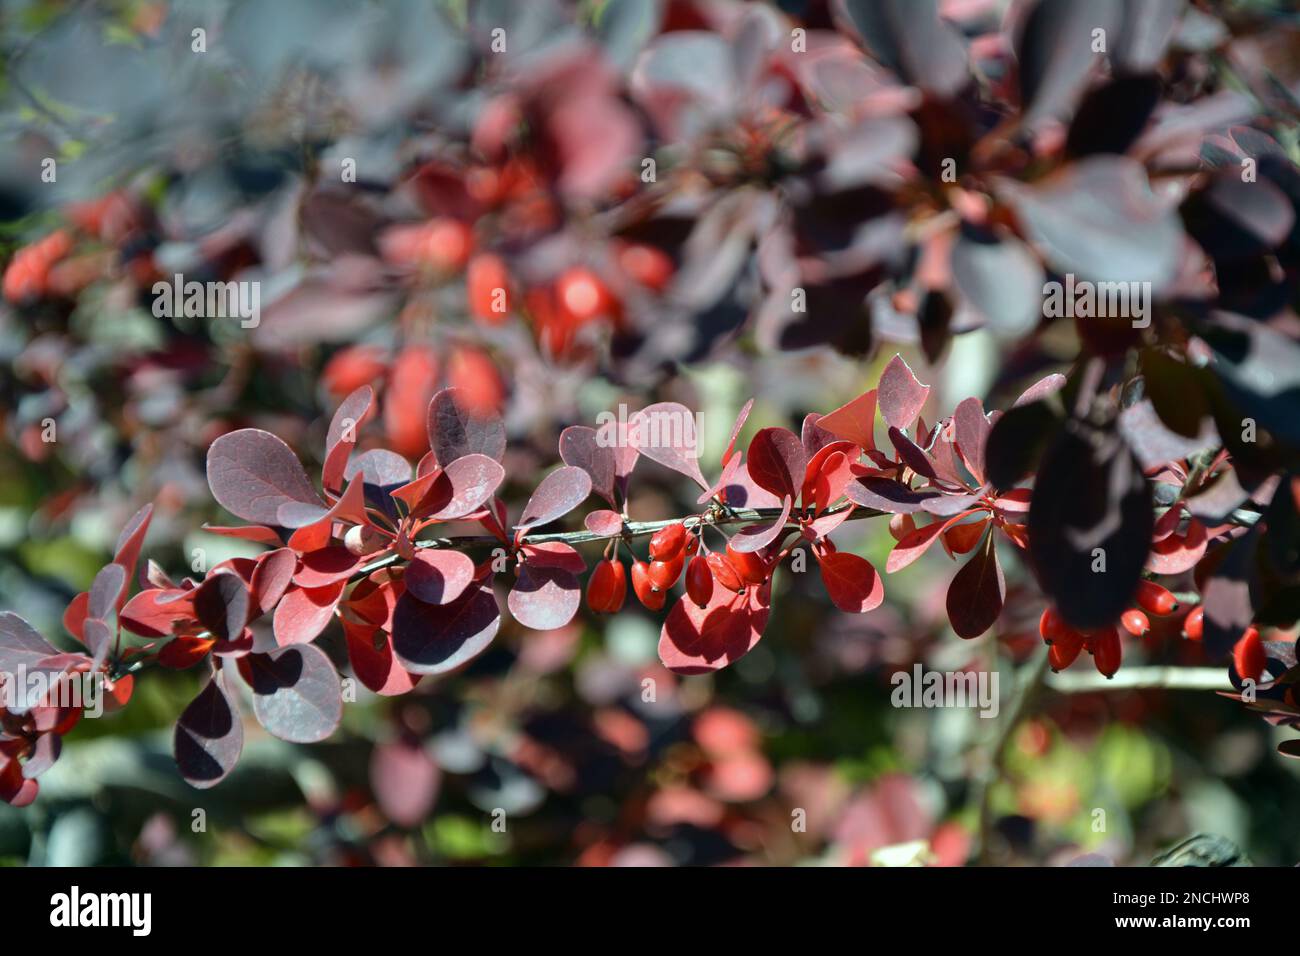 Closeup of the branches with red leaves and the ripe fruits of Japanese barberry (Berberis thunbergii) in autumn. Horizontal image, selective focus Stock Photo